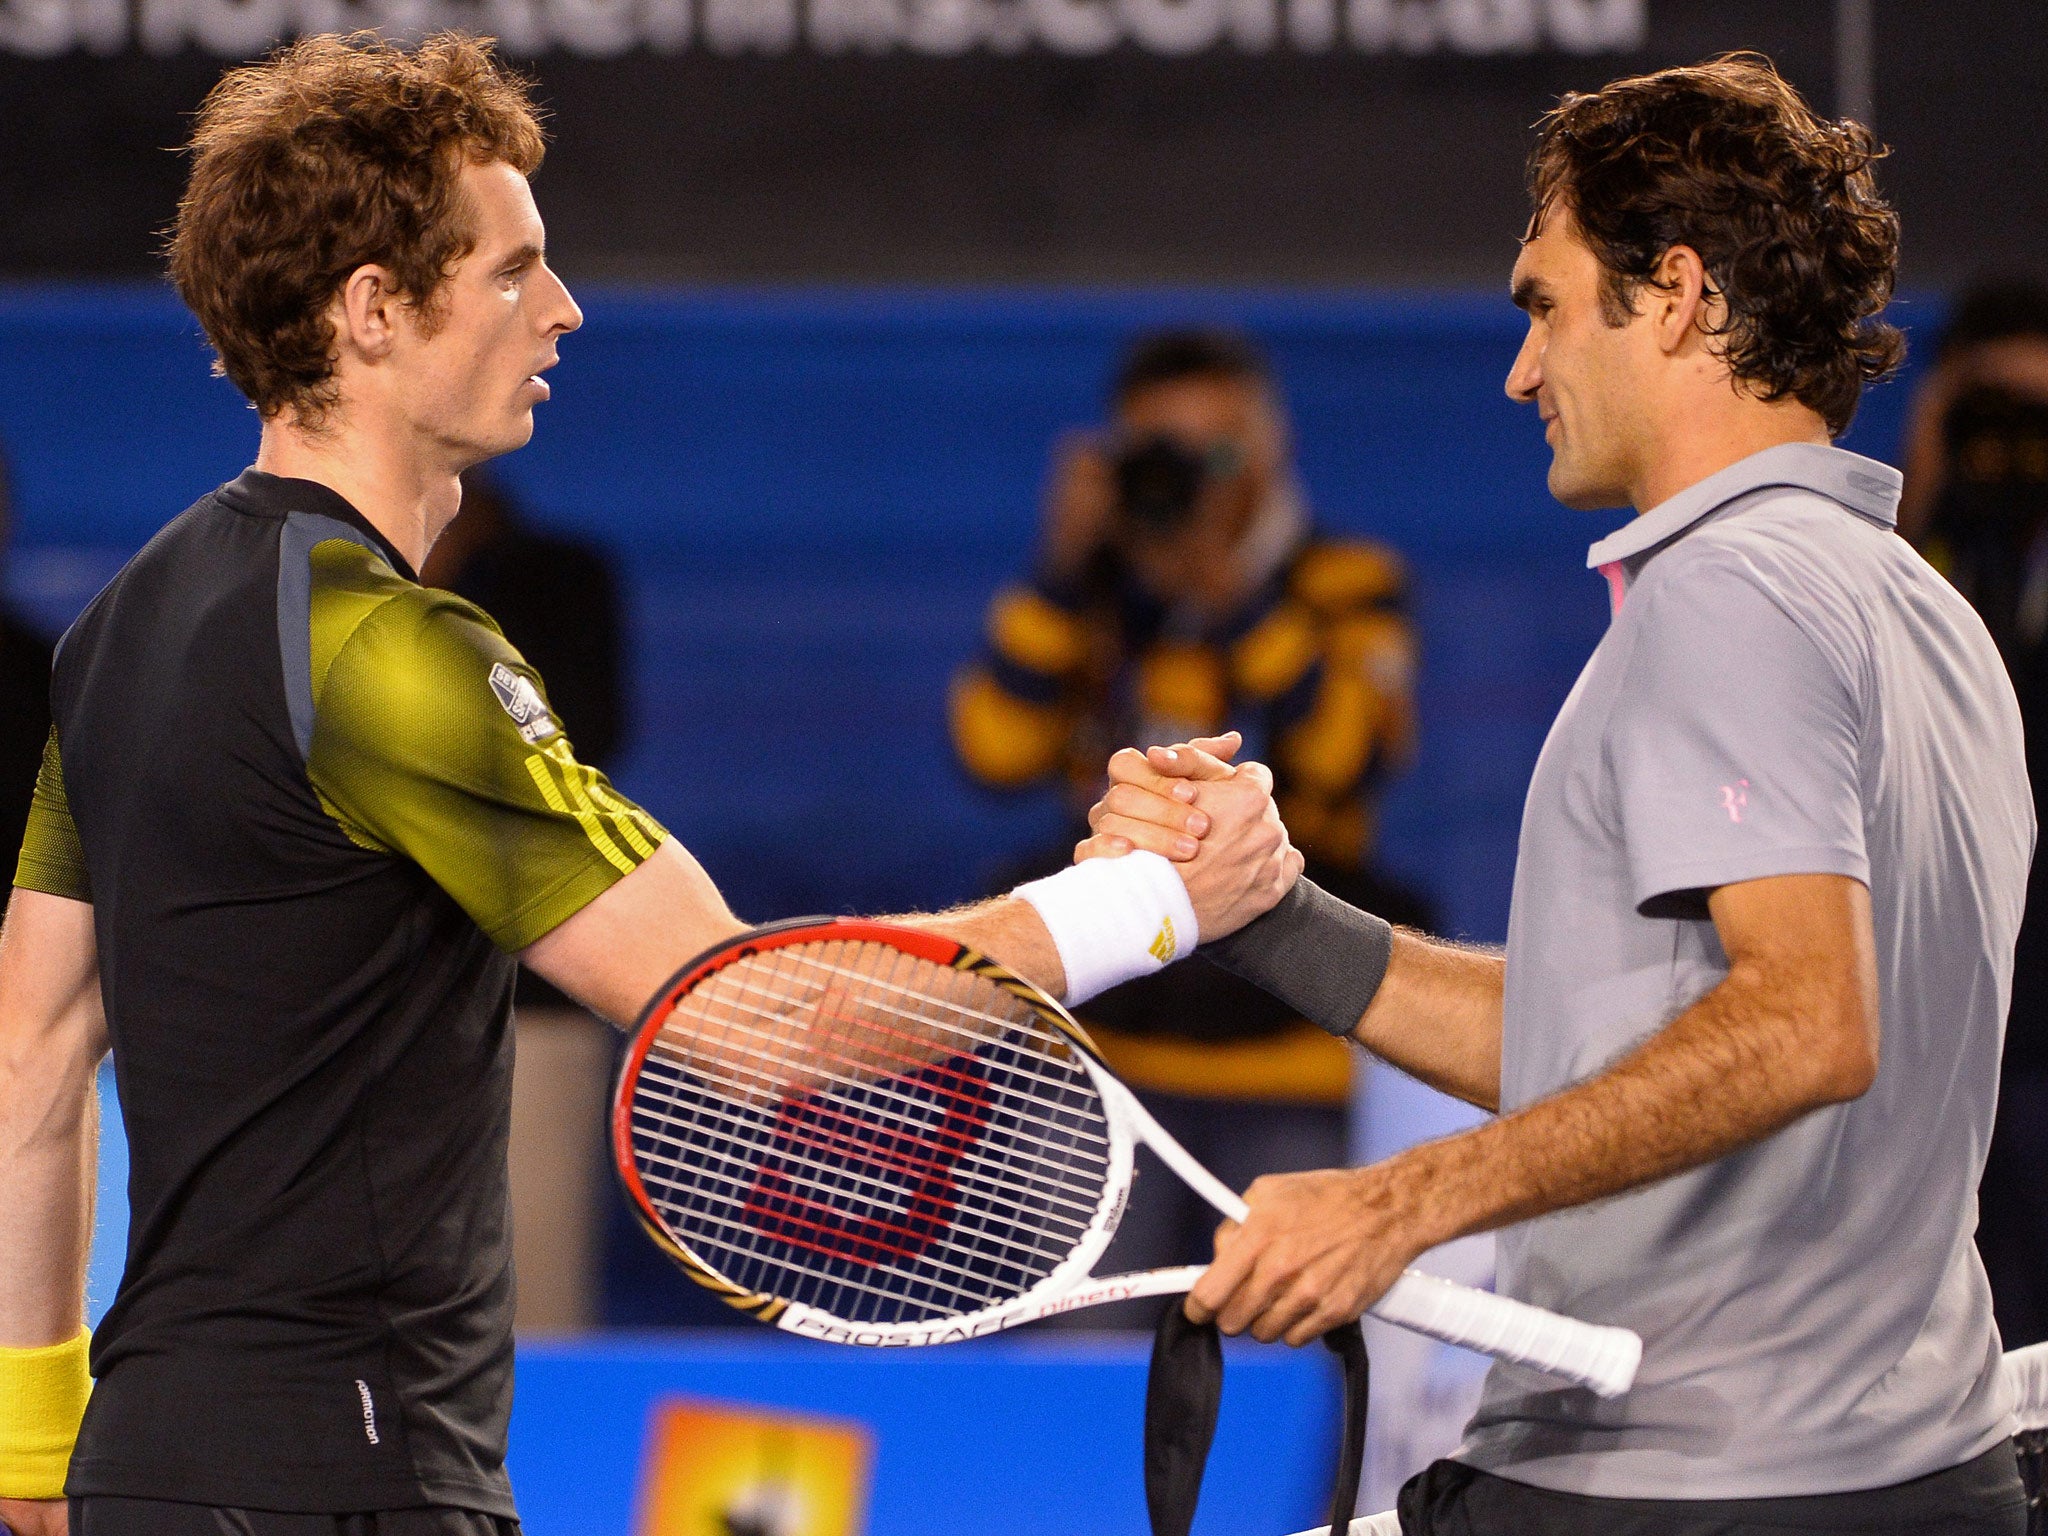 Australian Open 2014 Andy Murray V Roger Federer At The Grand Slams The Independent The